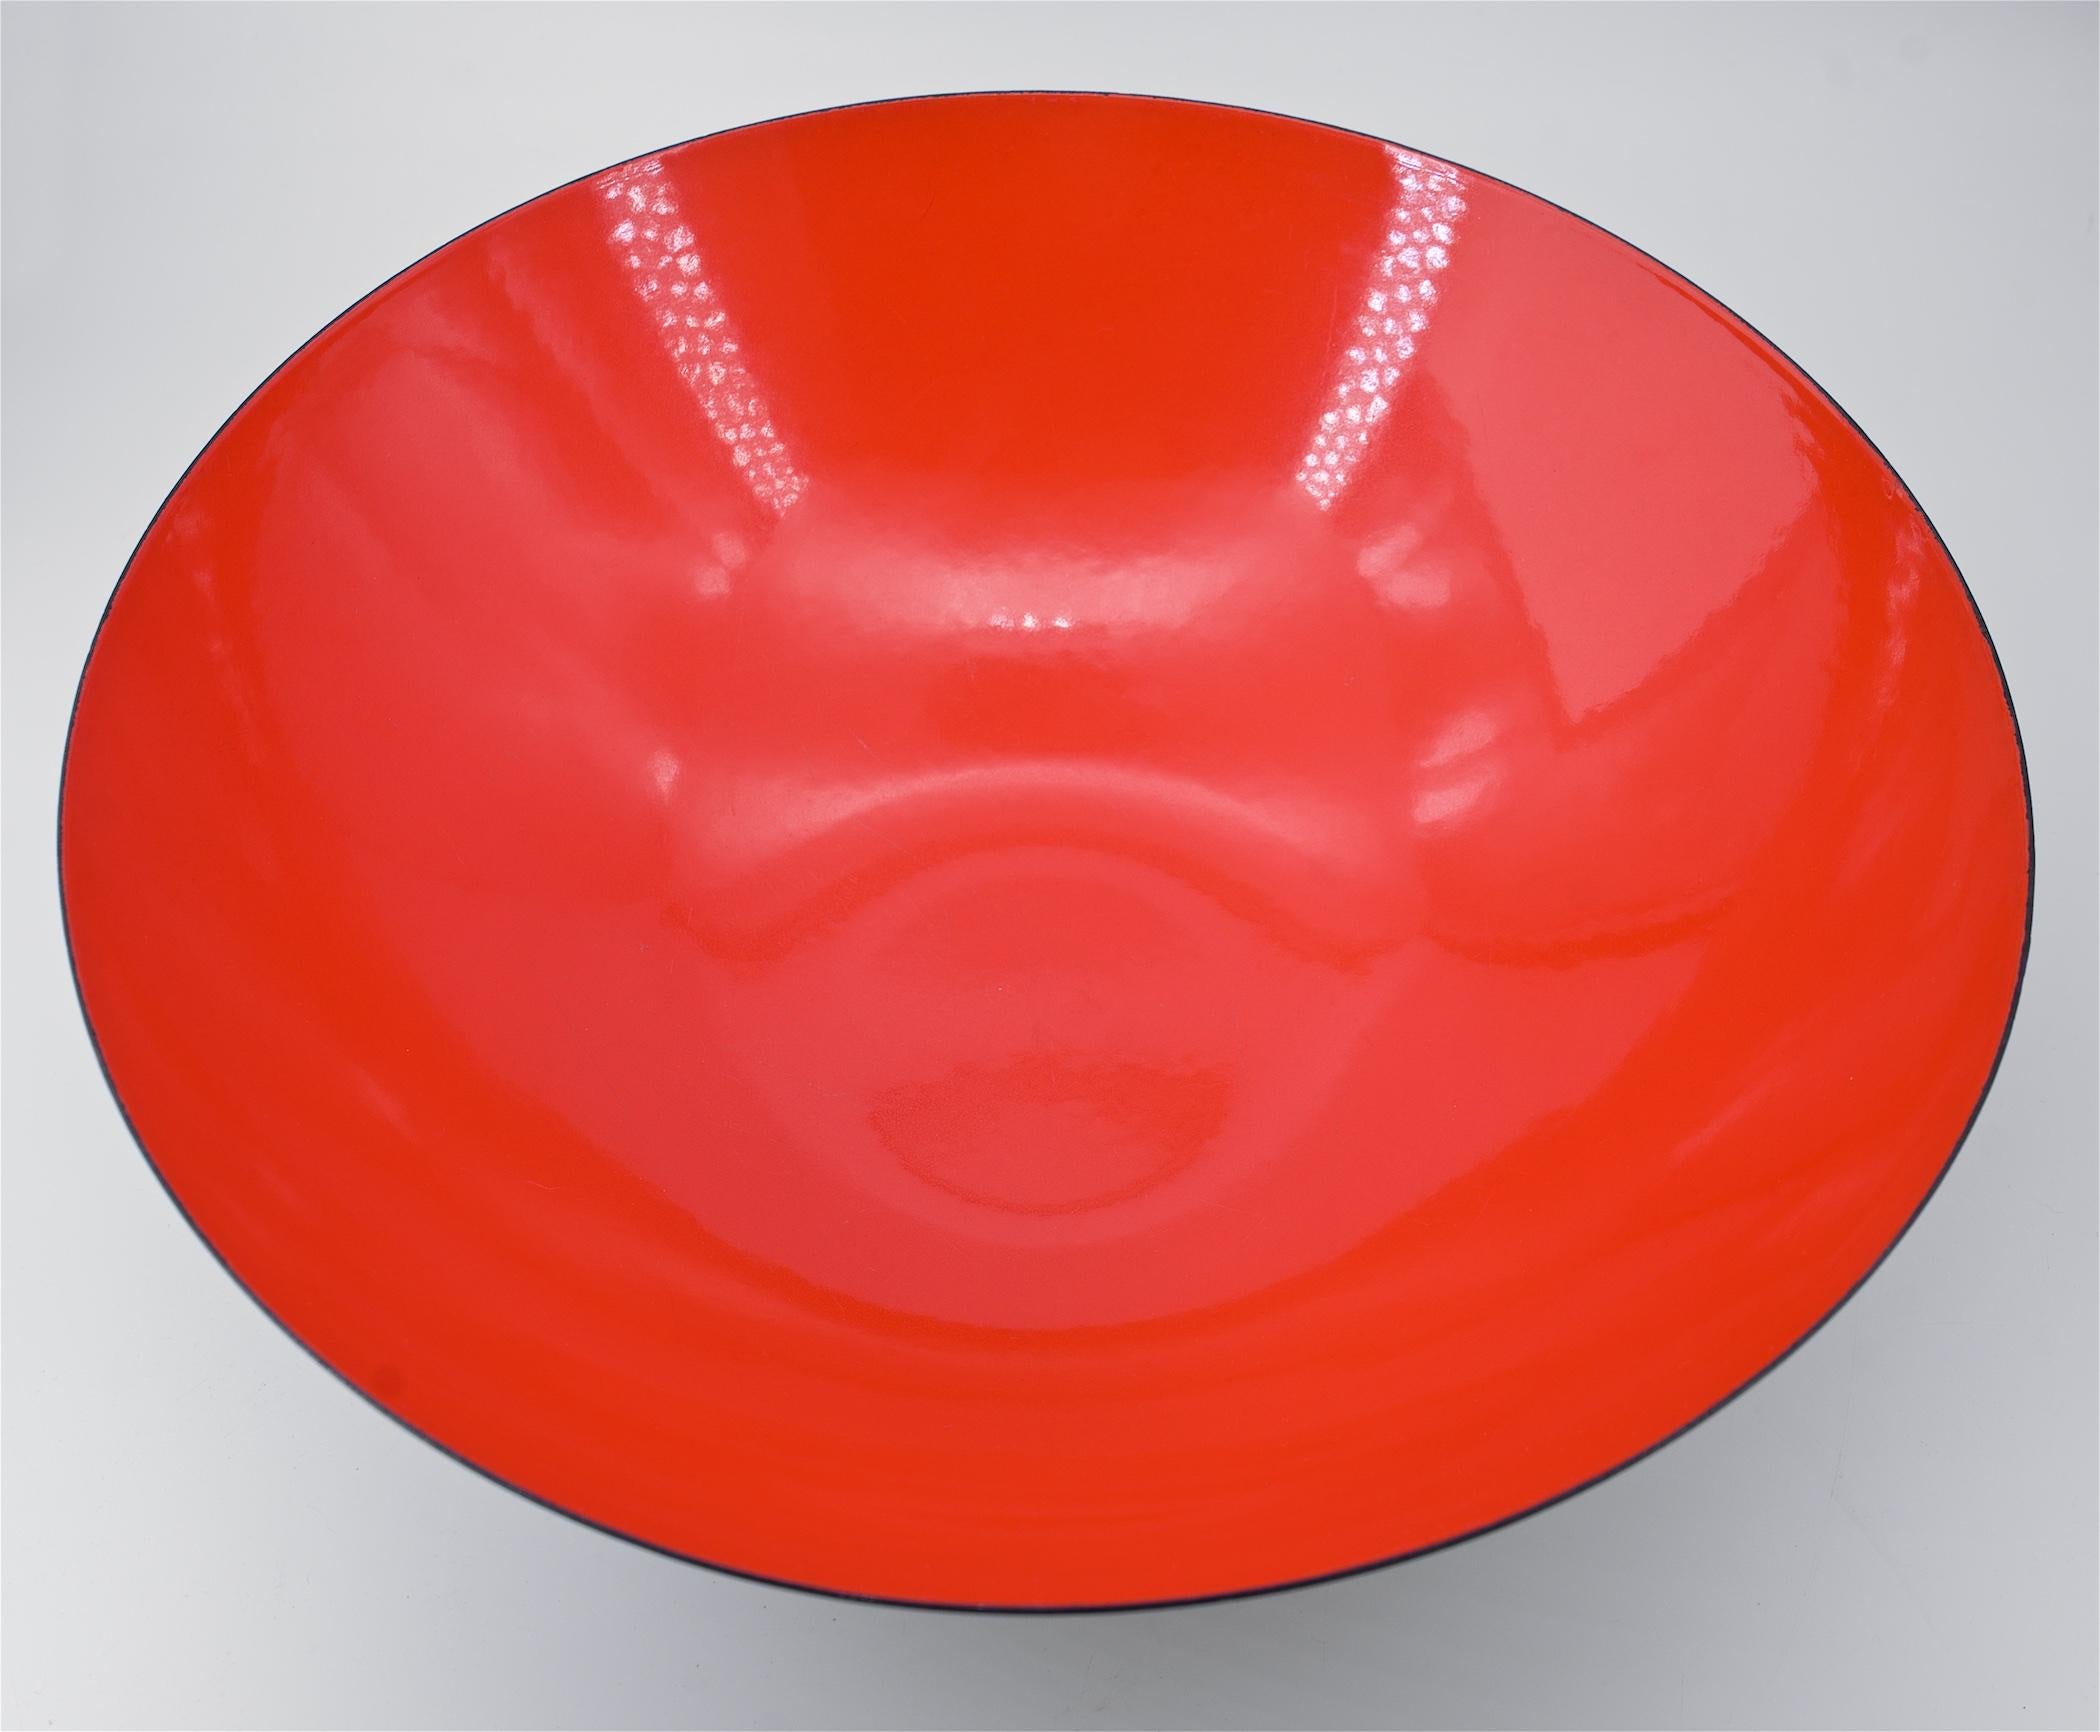 A wonderful 1950s mcm pop of color for any interior with a real design heritage behind it, by Herbert Krenchel for Krenit of Denmark. Massive at 15 inches in diameter.